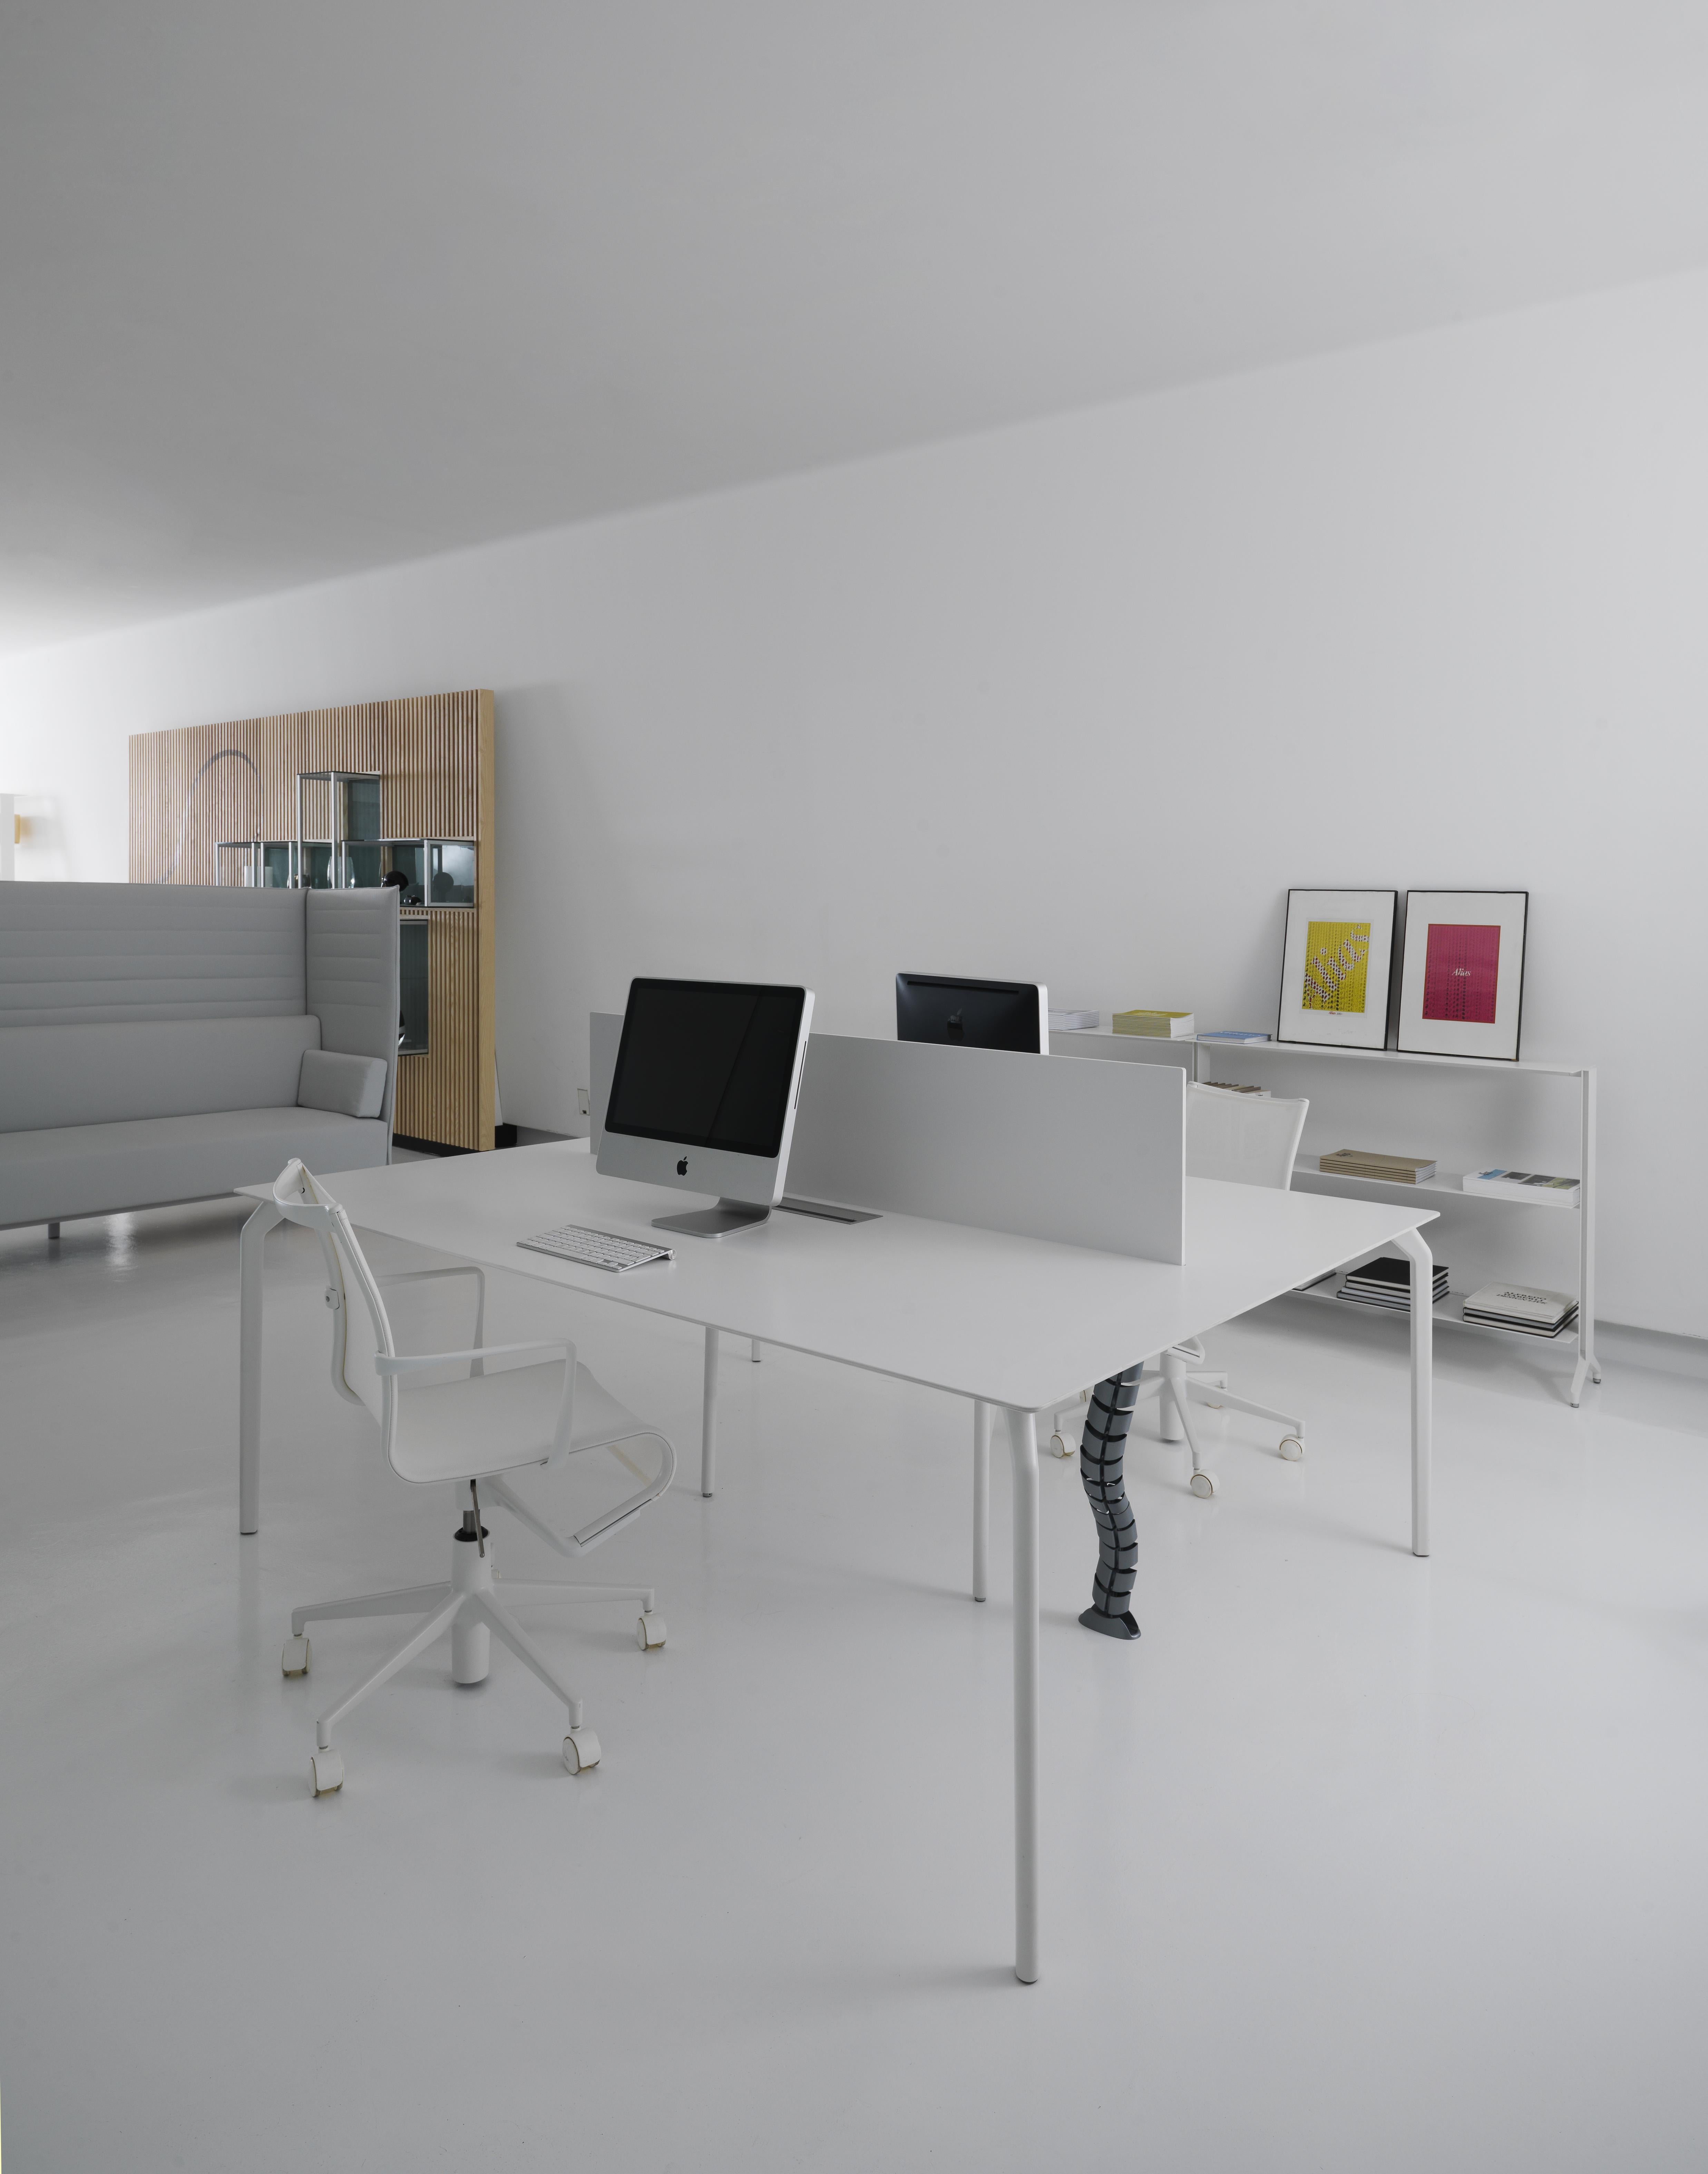 Alias Large 632 TEC 1000 Table in White with Lacquered Aluminum Frame by Alfredo Häberli

Modular table with structure in die-cast and extruded aluminium elements. Top in: - plywood Full Color th. 12 mm - bilaminate white th. 18 mm - plywood